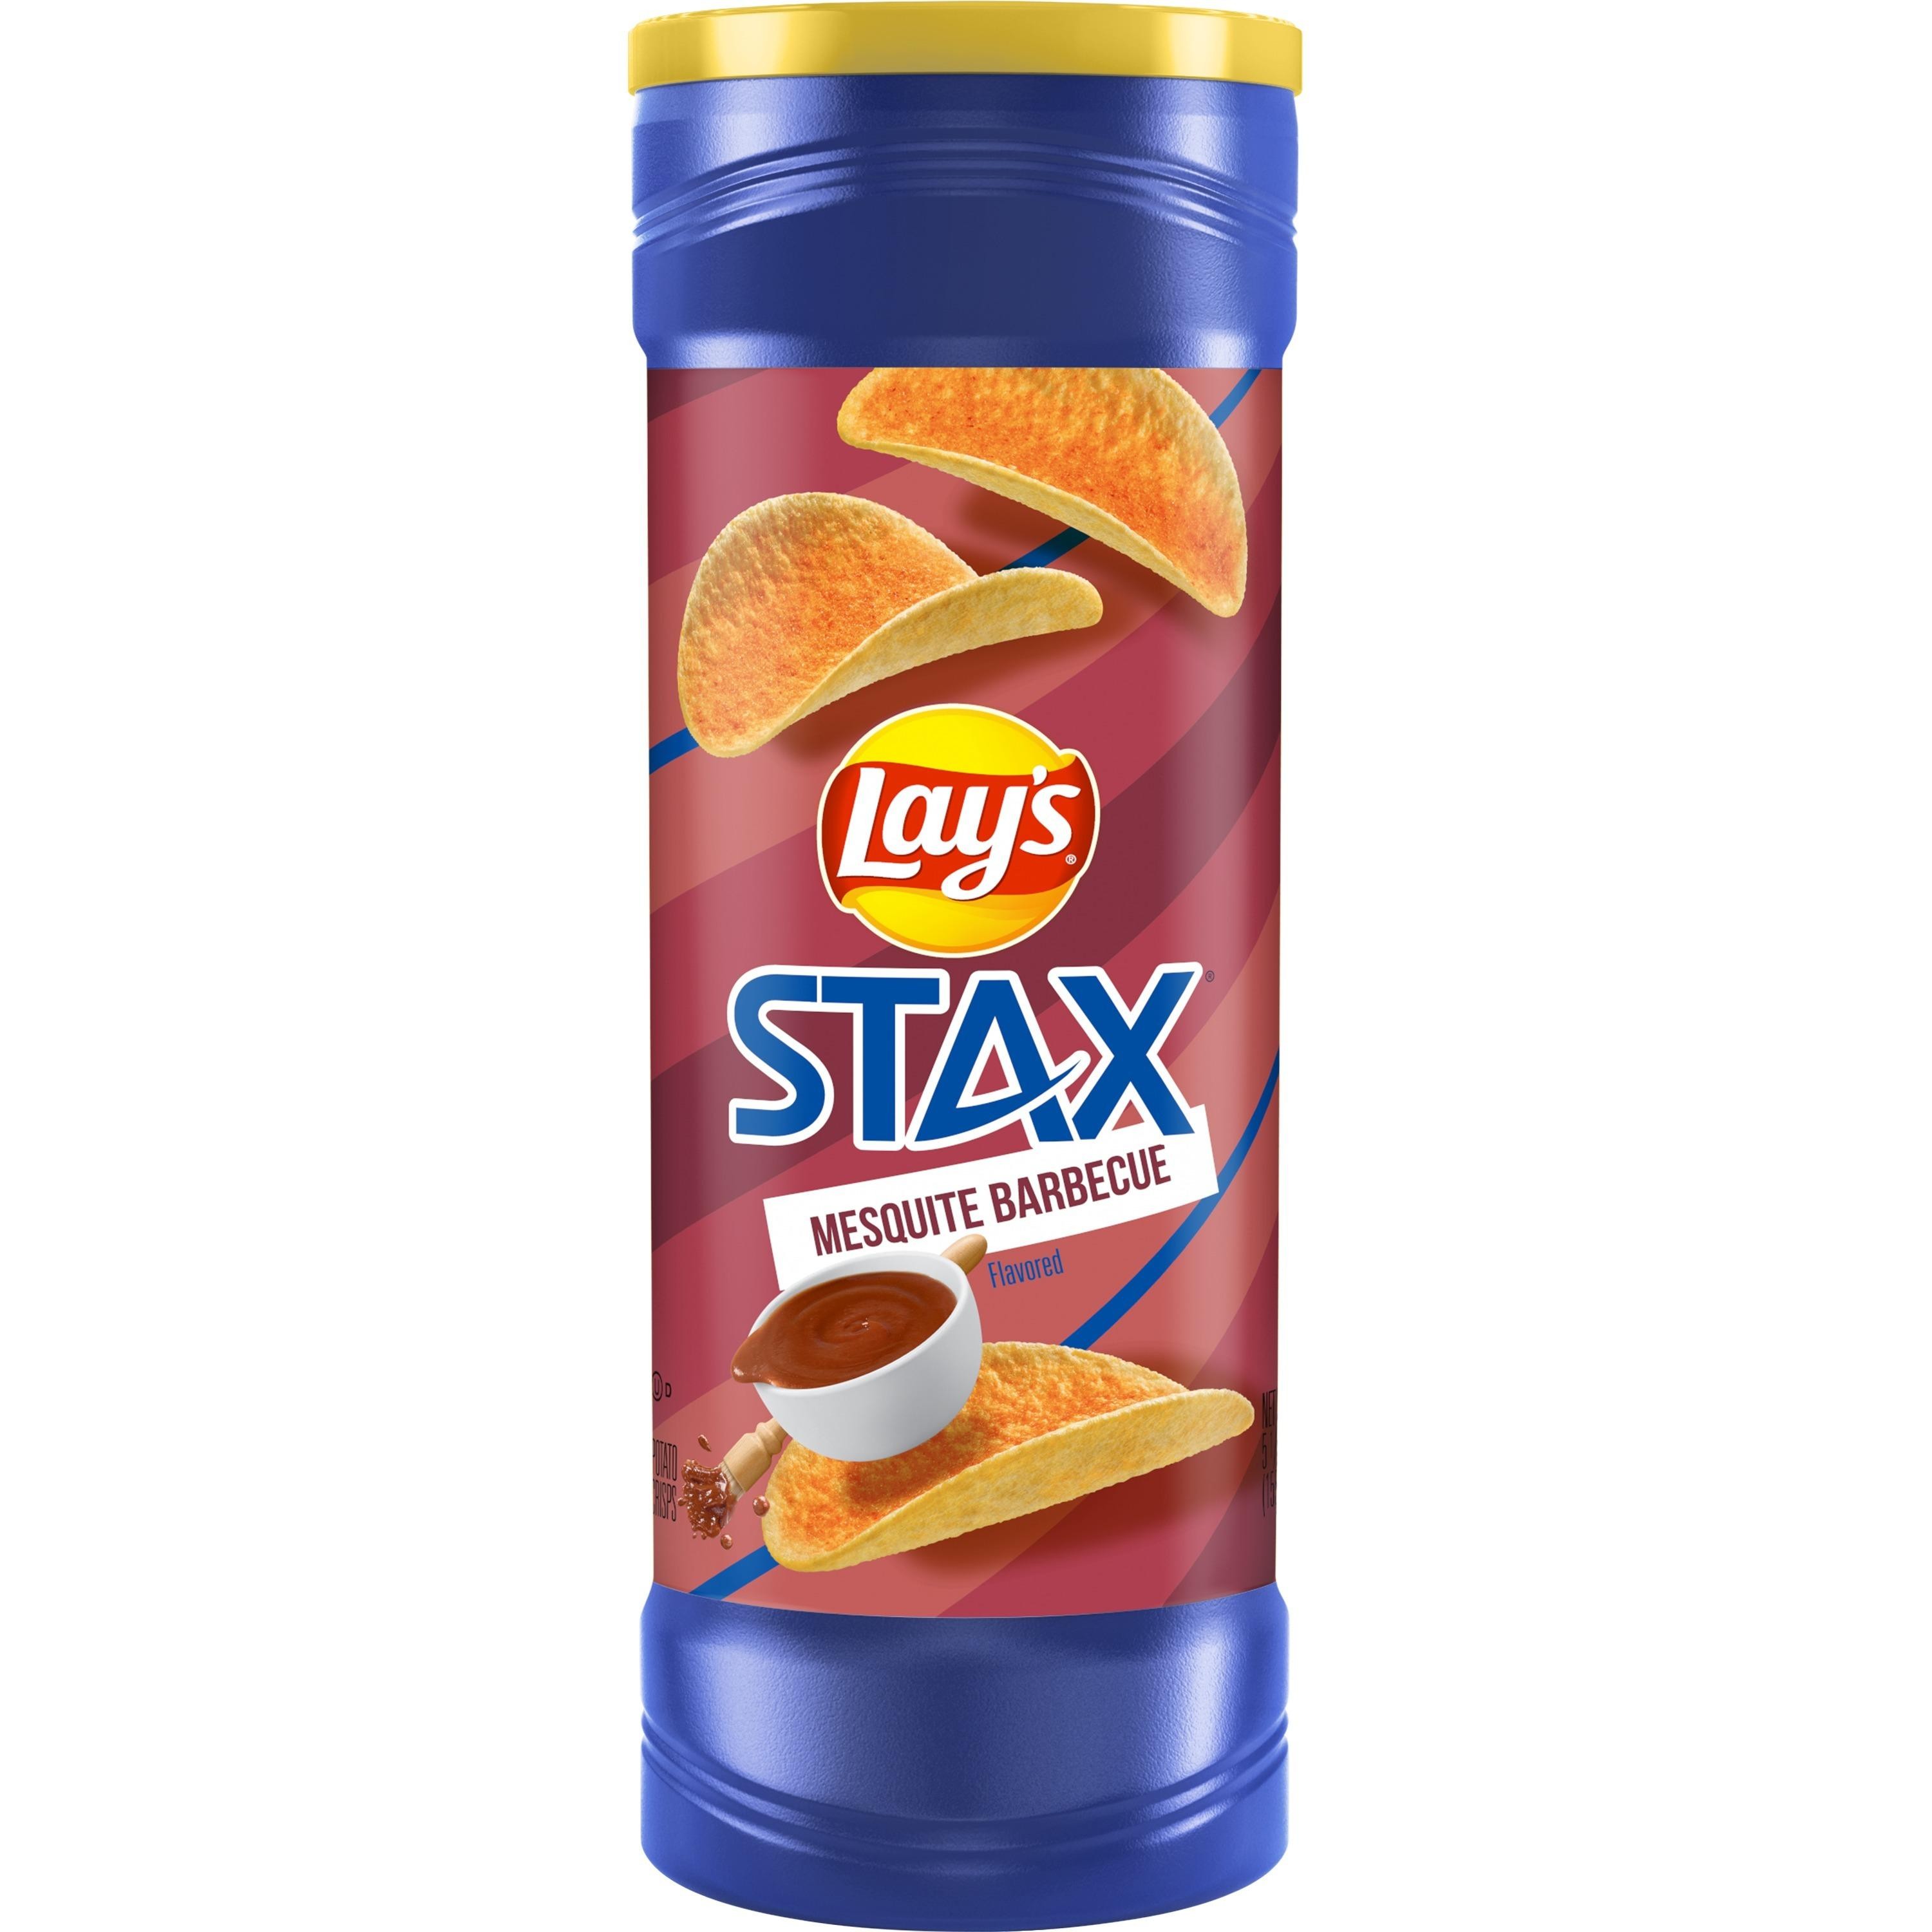 Lays Stax, Mesquite Barbecue Flavored - 5.5 Oz